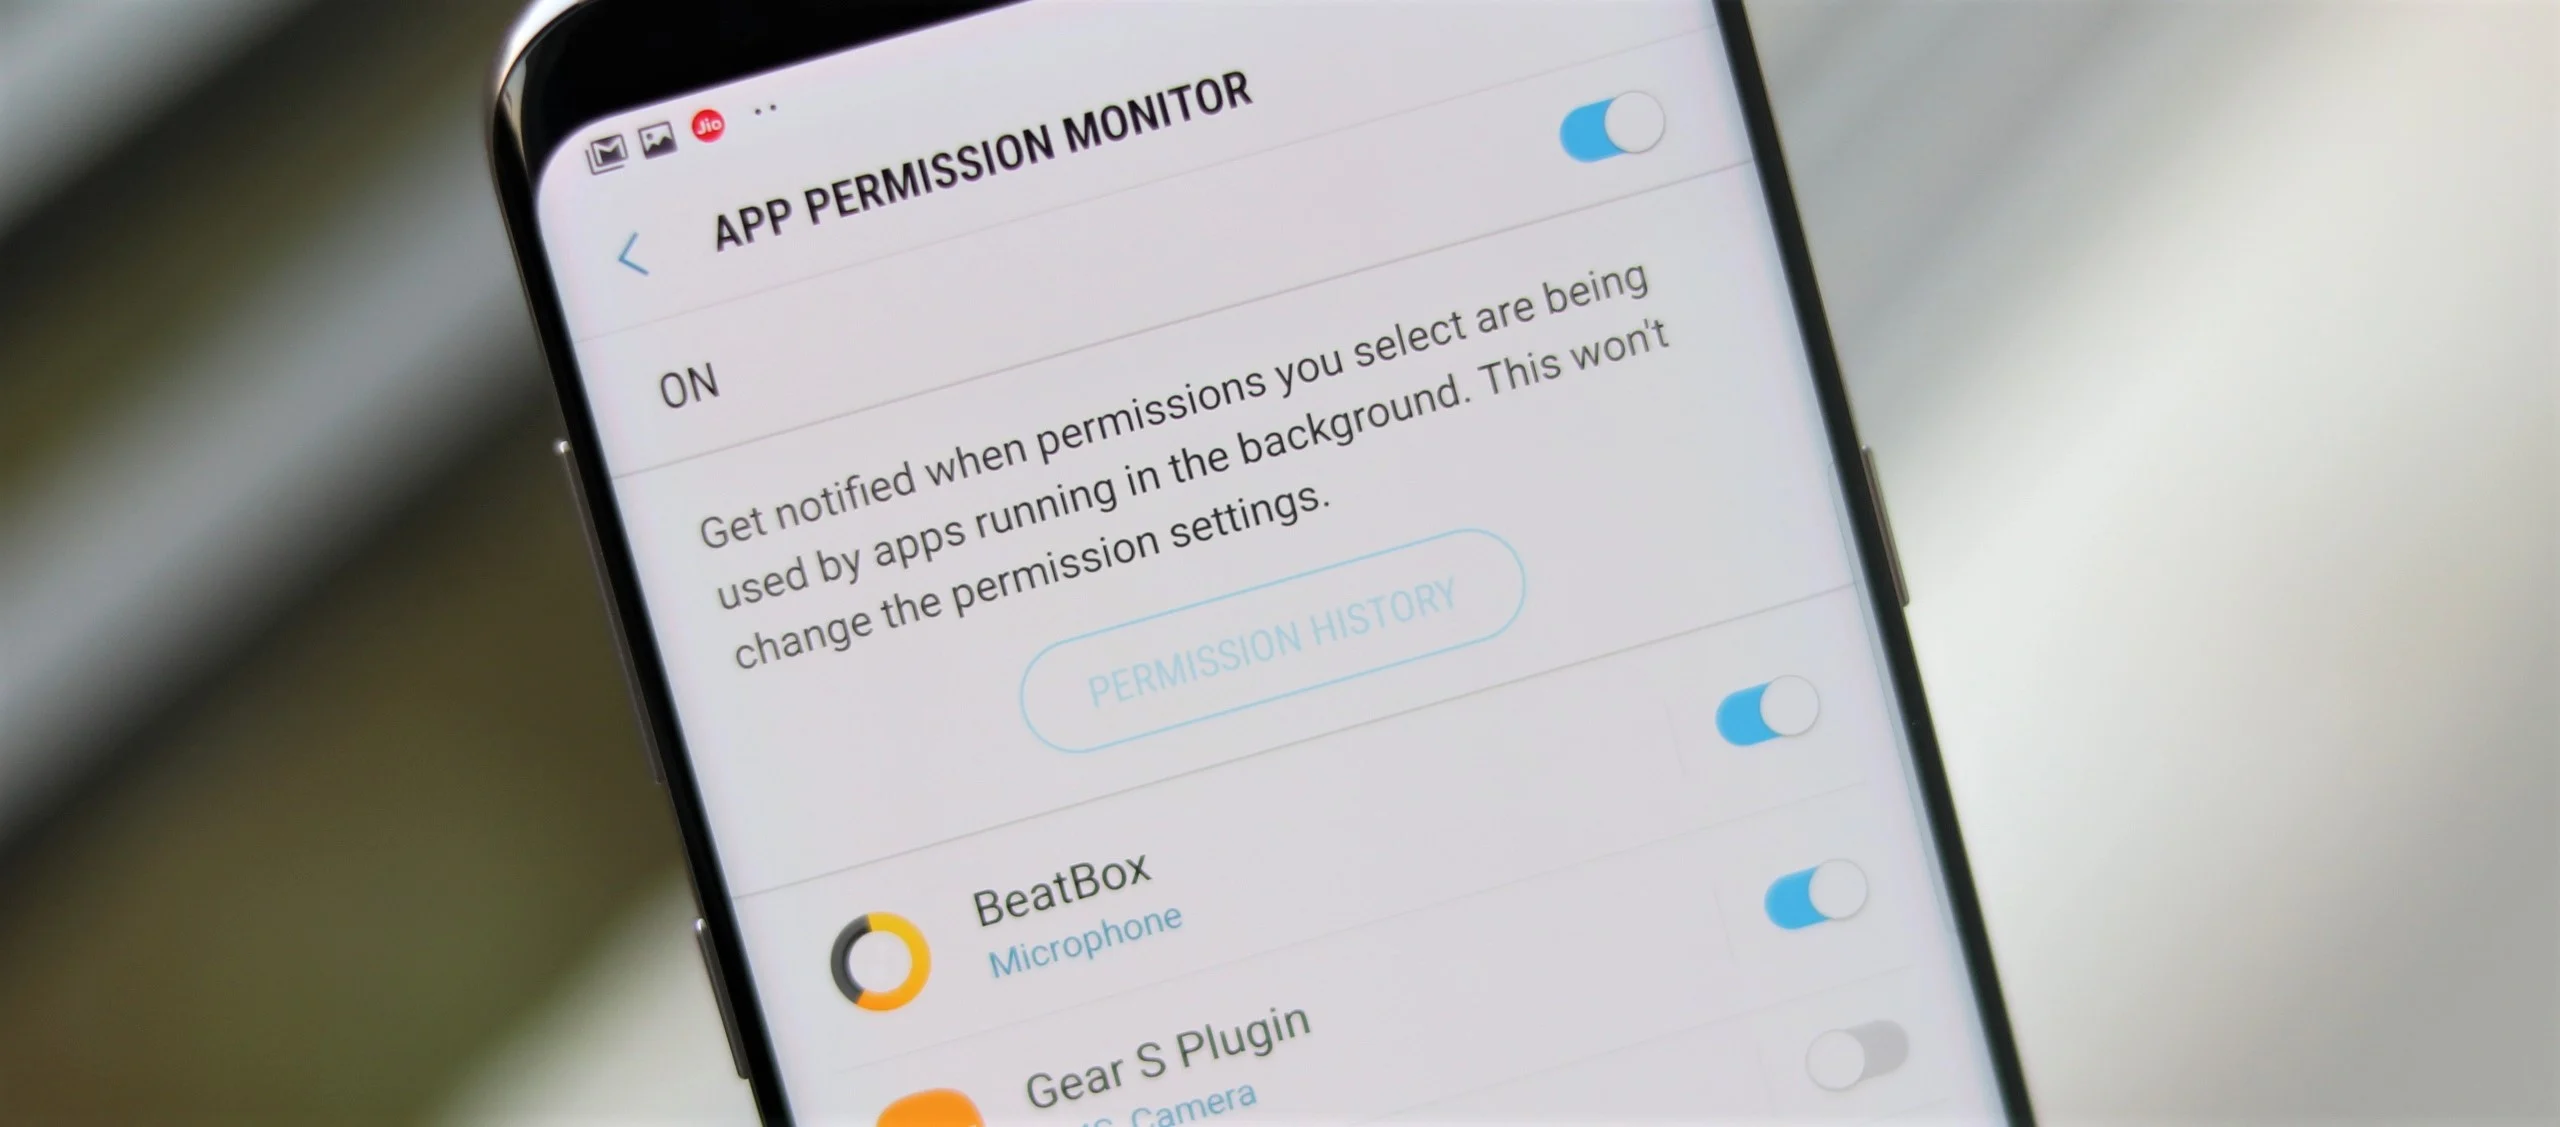 What is Permission Monitoring?